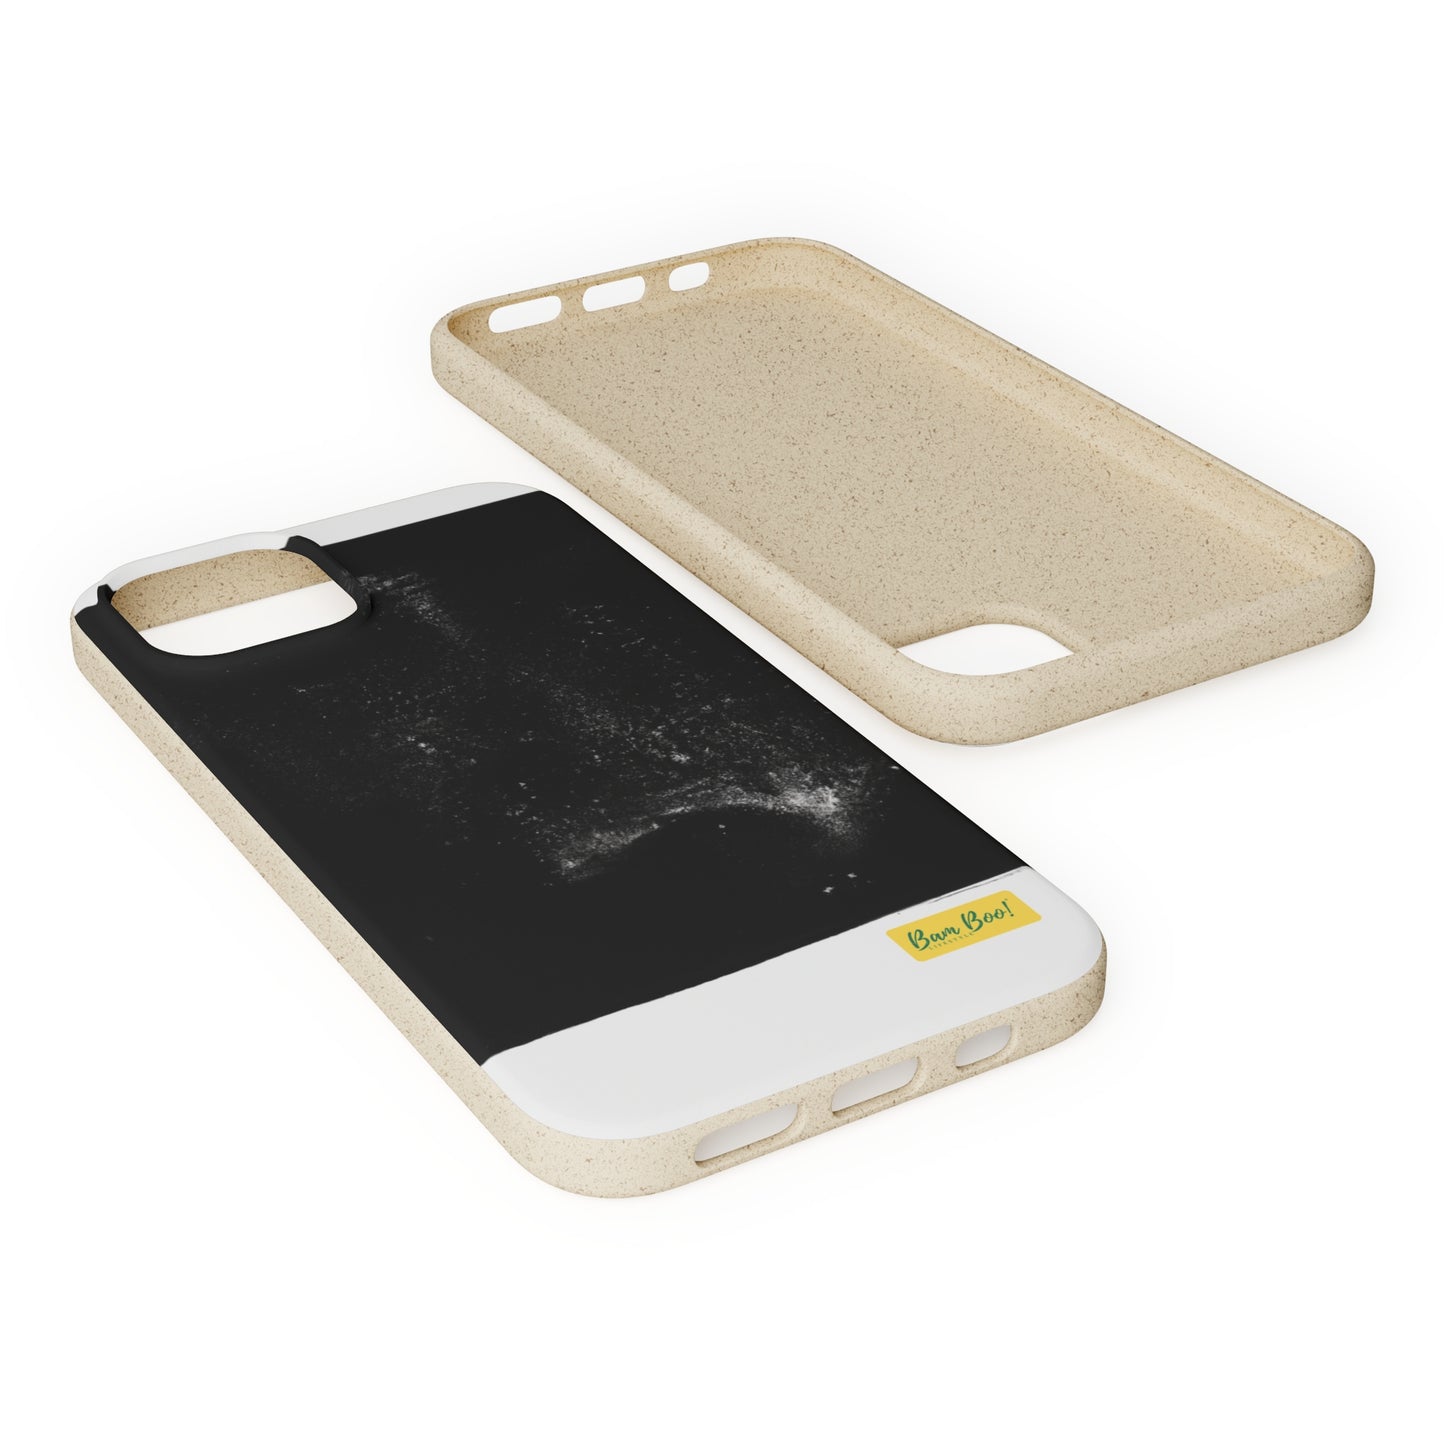 "Shades of Emotion: Exploring the Binary Nature of Light and Dark" - Bam Boo! Lifestyle Eco-friendly Cases